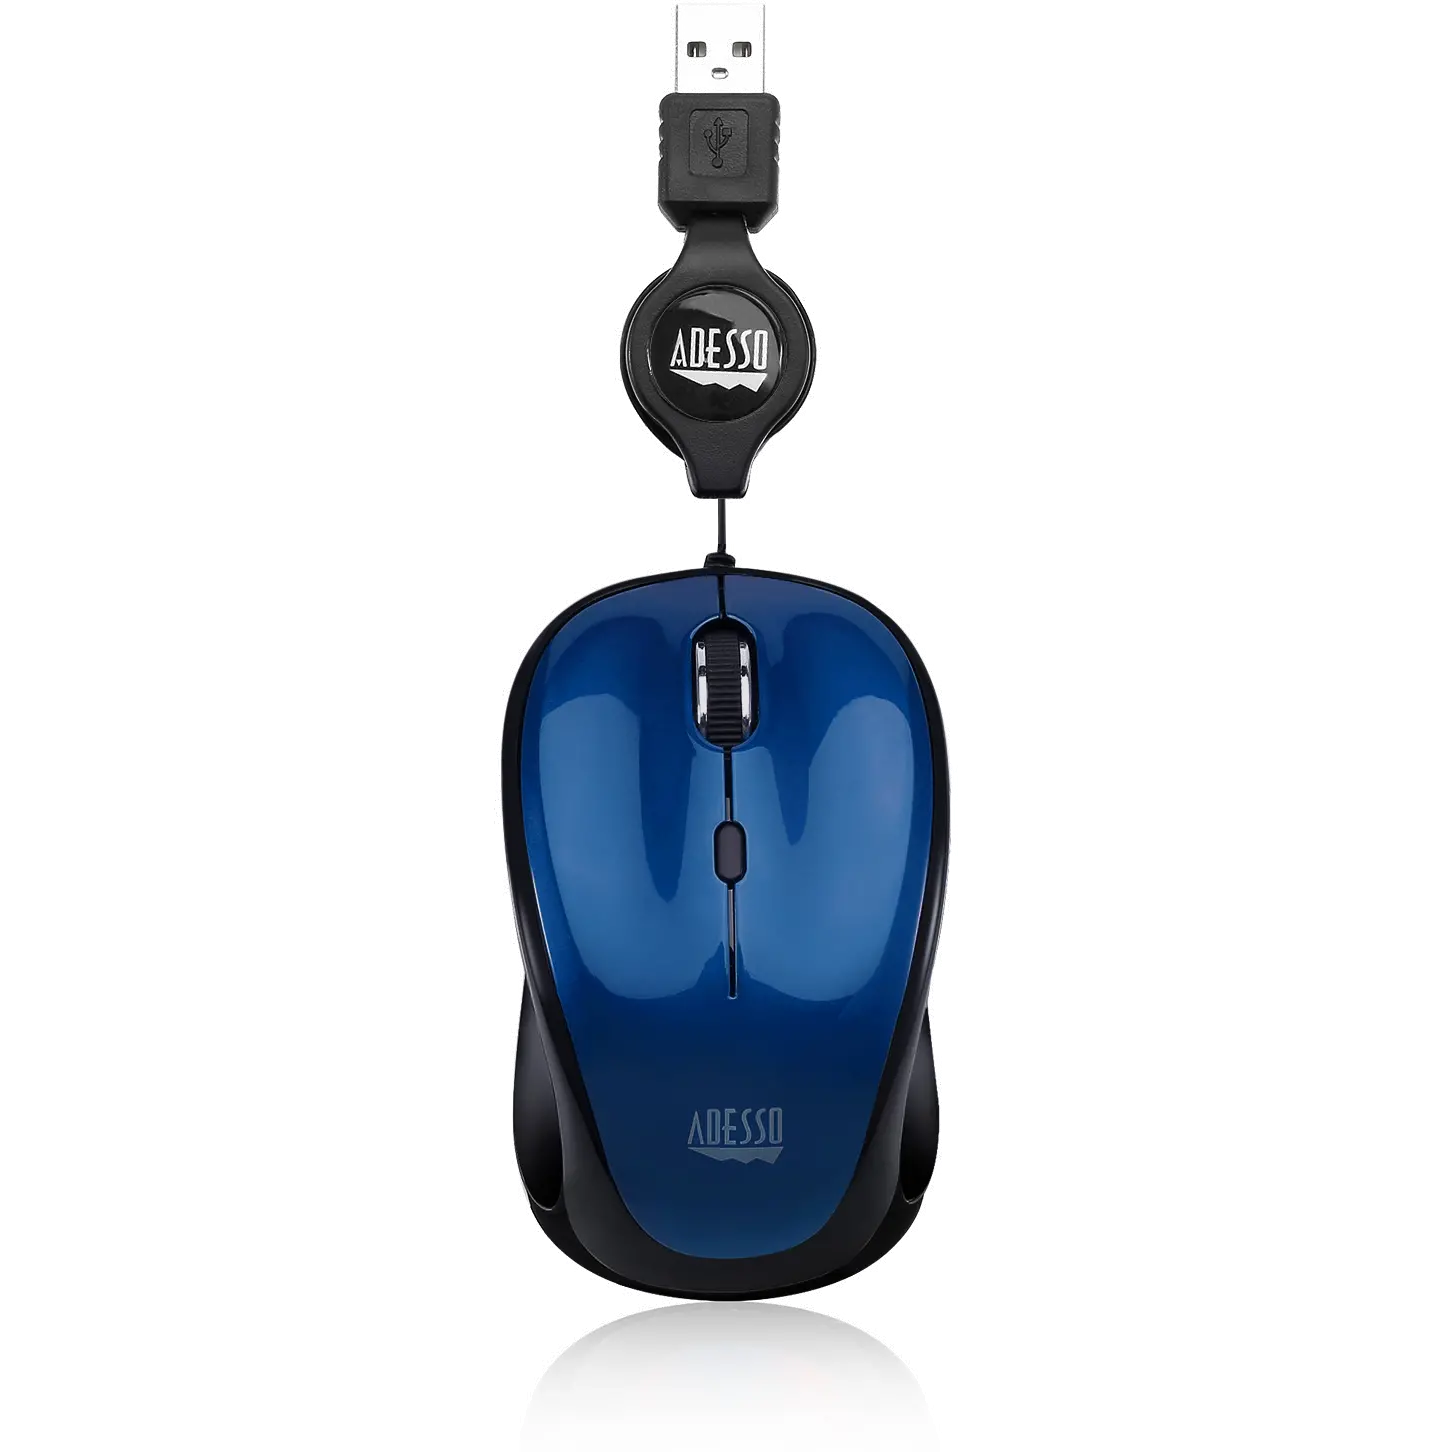 iMOUSE-S8 BLUE Adesso Blue USB Illuminated Retractable Mouse - iMouse S8-1